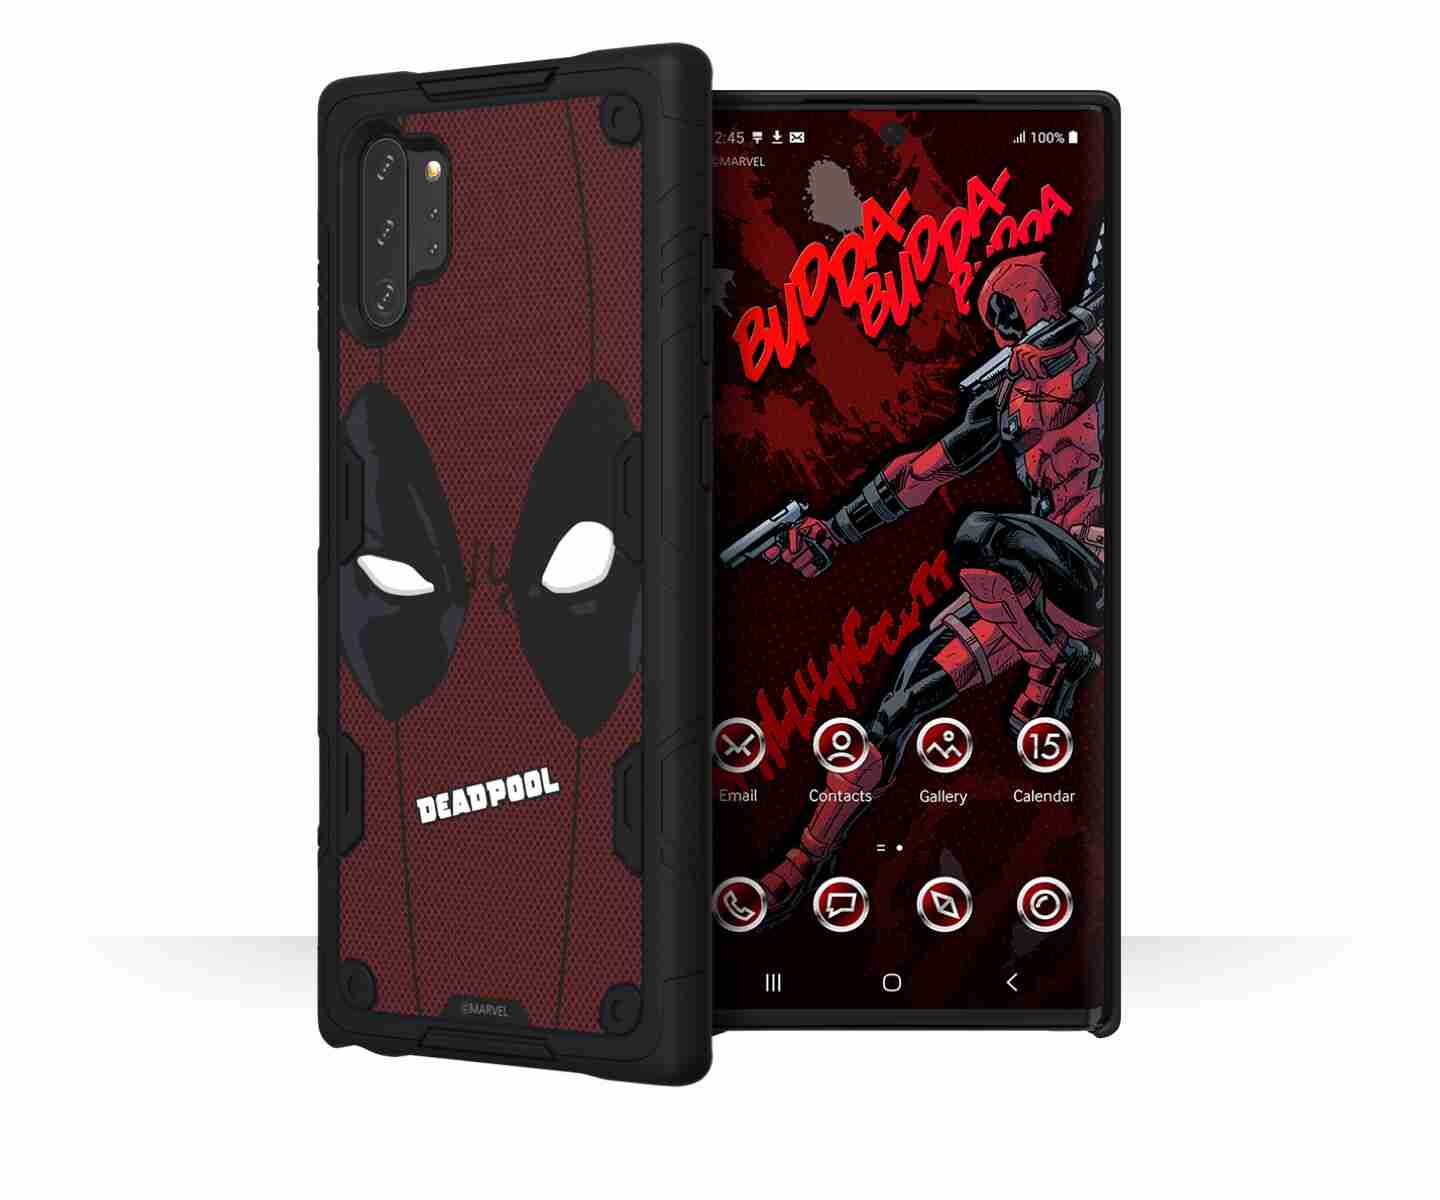 Meet the Marvel's Deadpool edition Smart Protective Cover at Galaxy Friends!